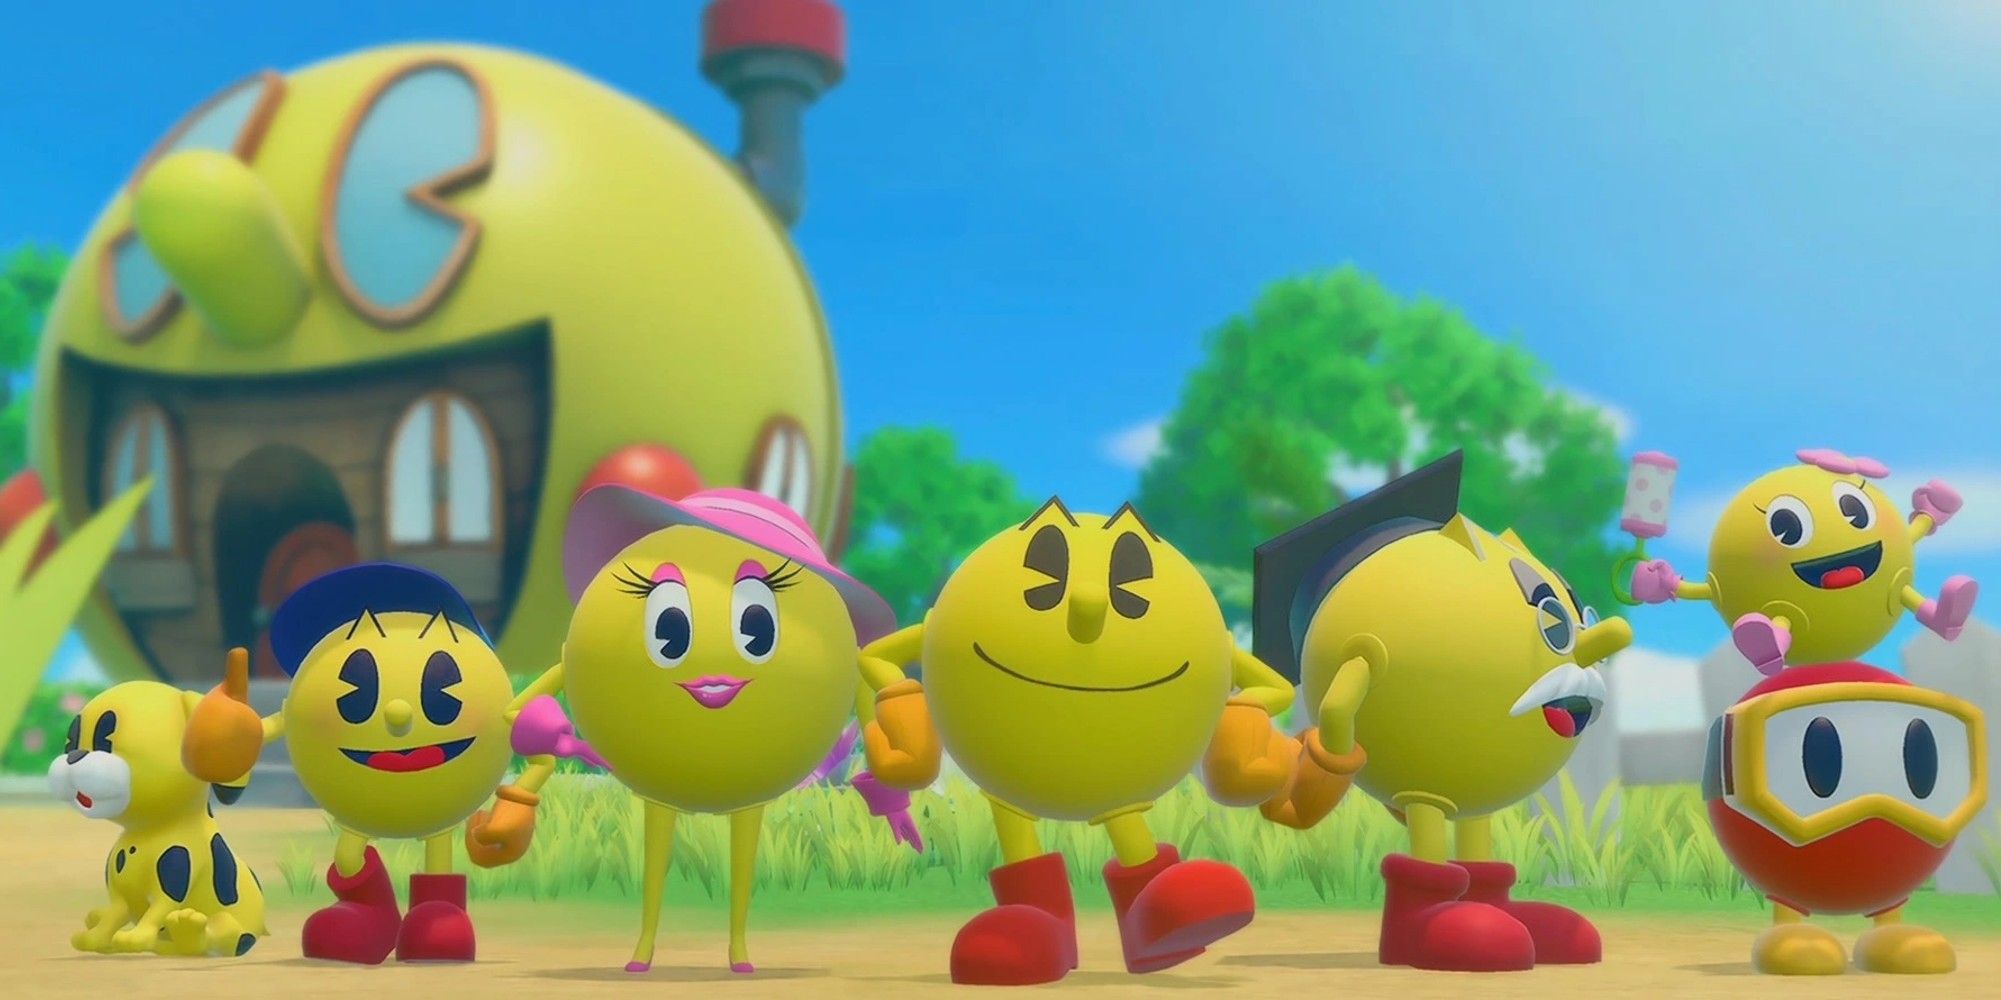 pac-man's family in world: re-pac